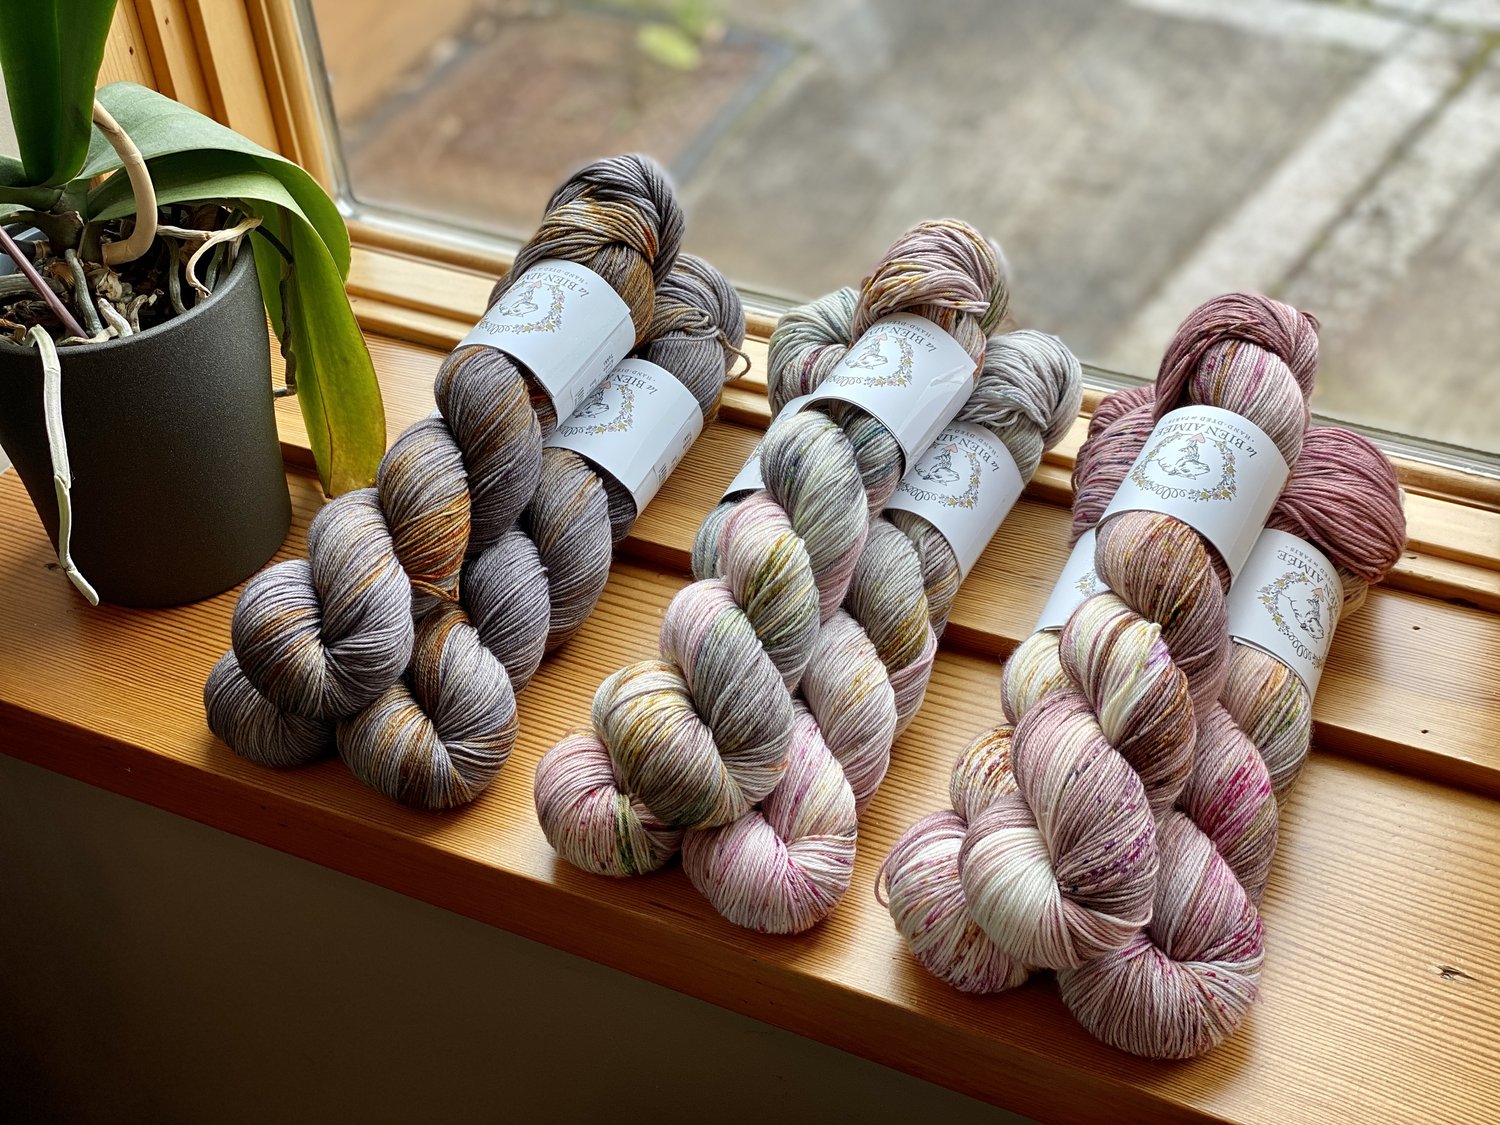 Deluxe Worsted - Universal Yarns — Starlight Knitting Society